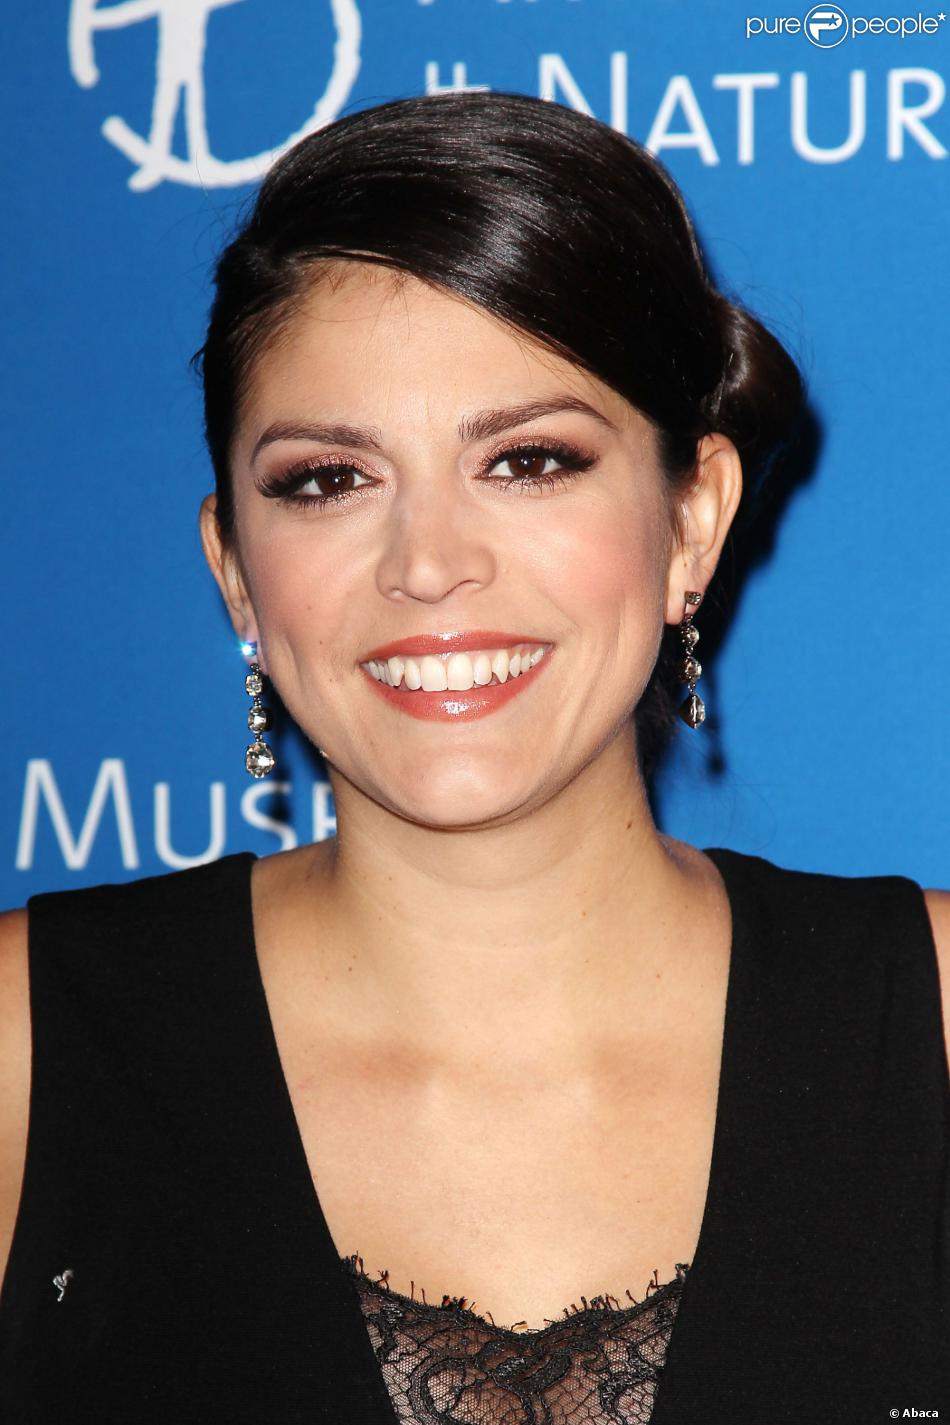 C---CECILY STRONG on Pinterest | 73 Photos on saturday night live, ap���